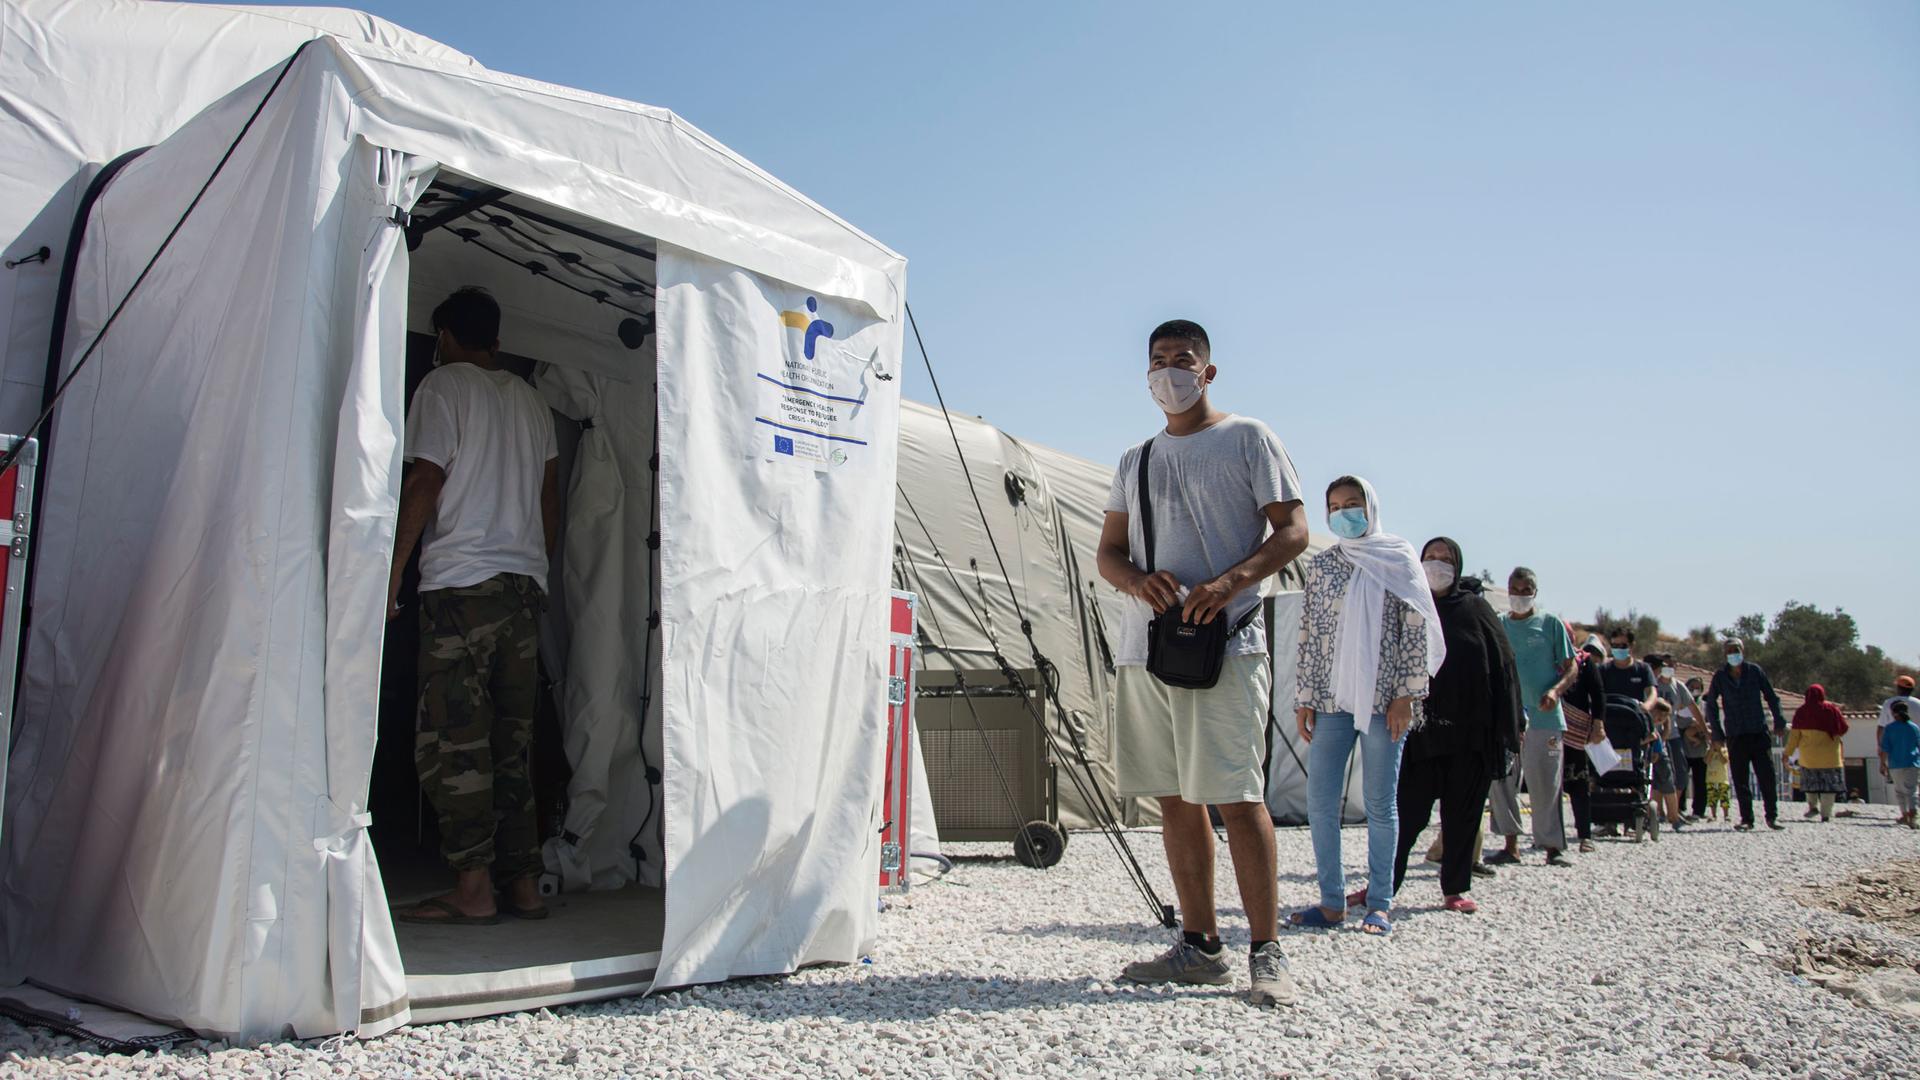 A white medical tent is shown with a long line of people waiting outside of it.